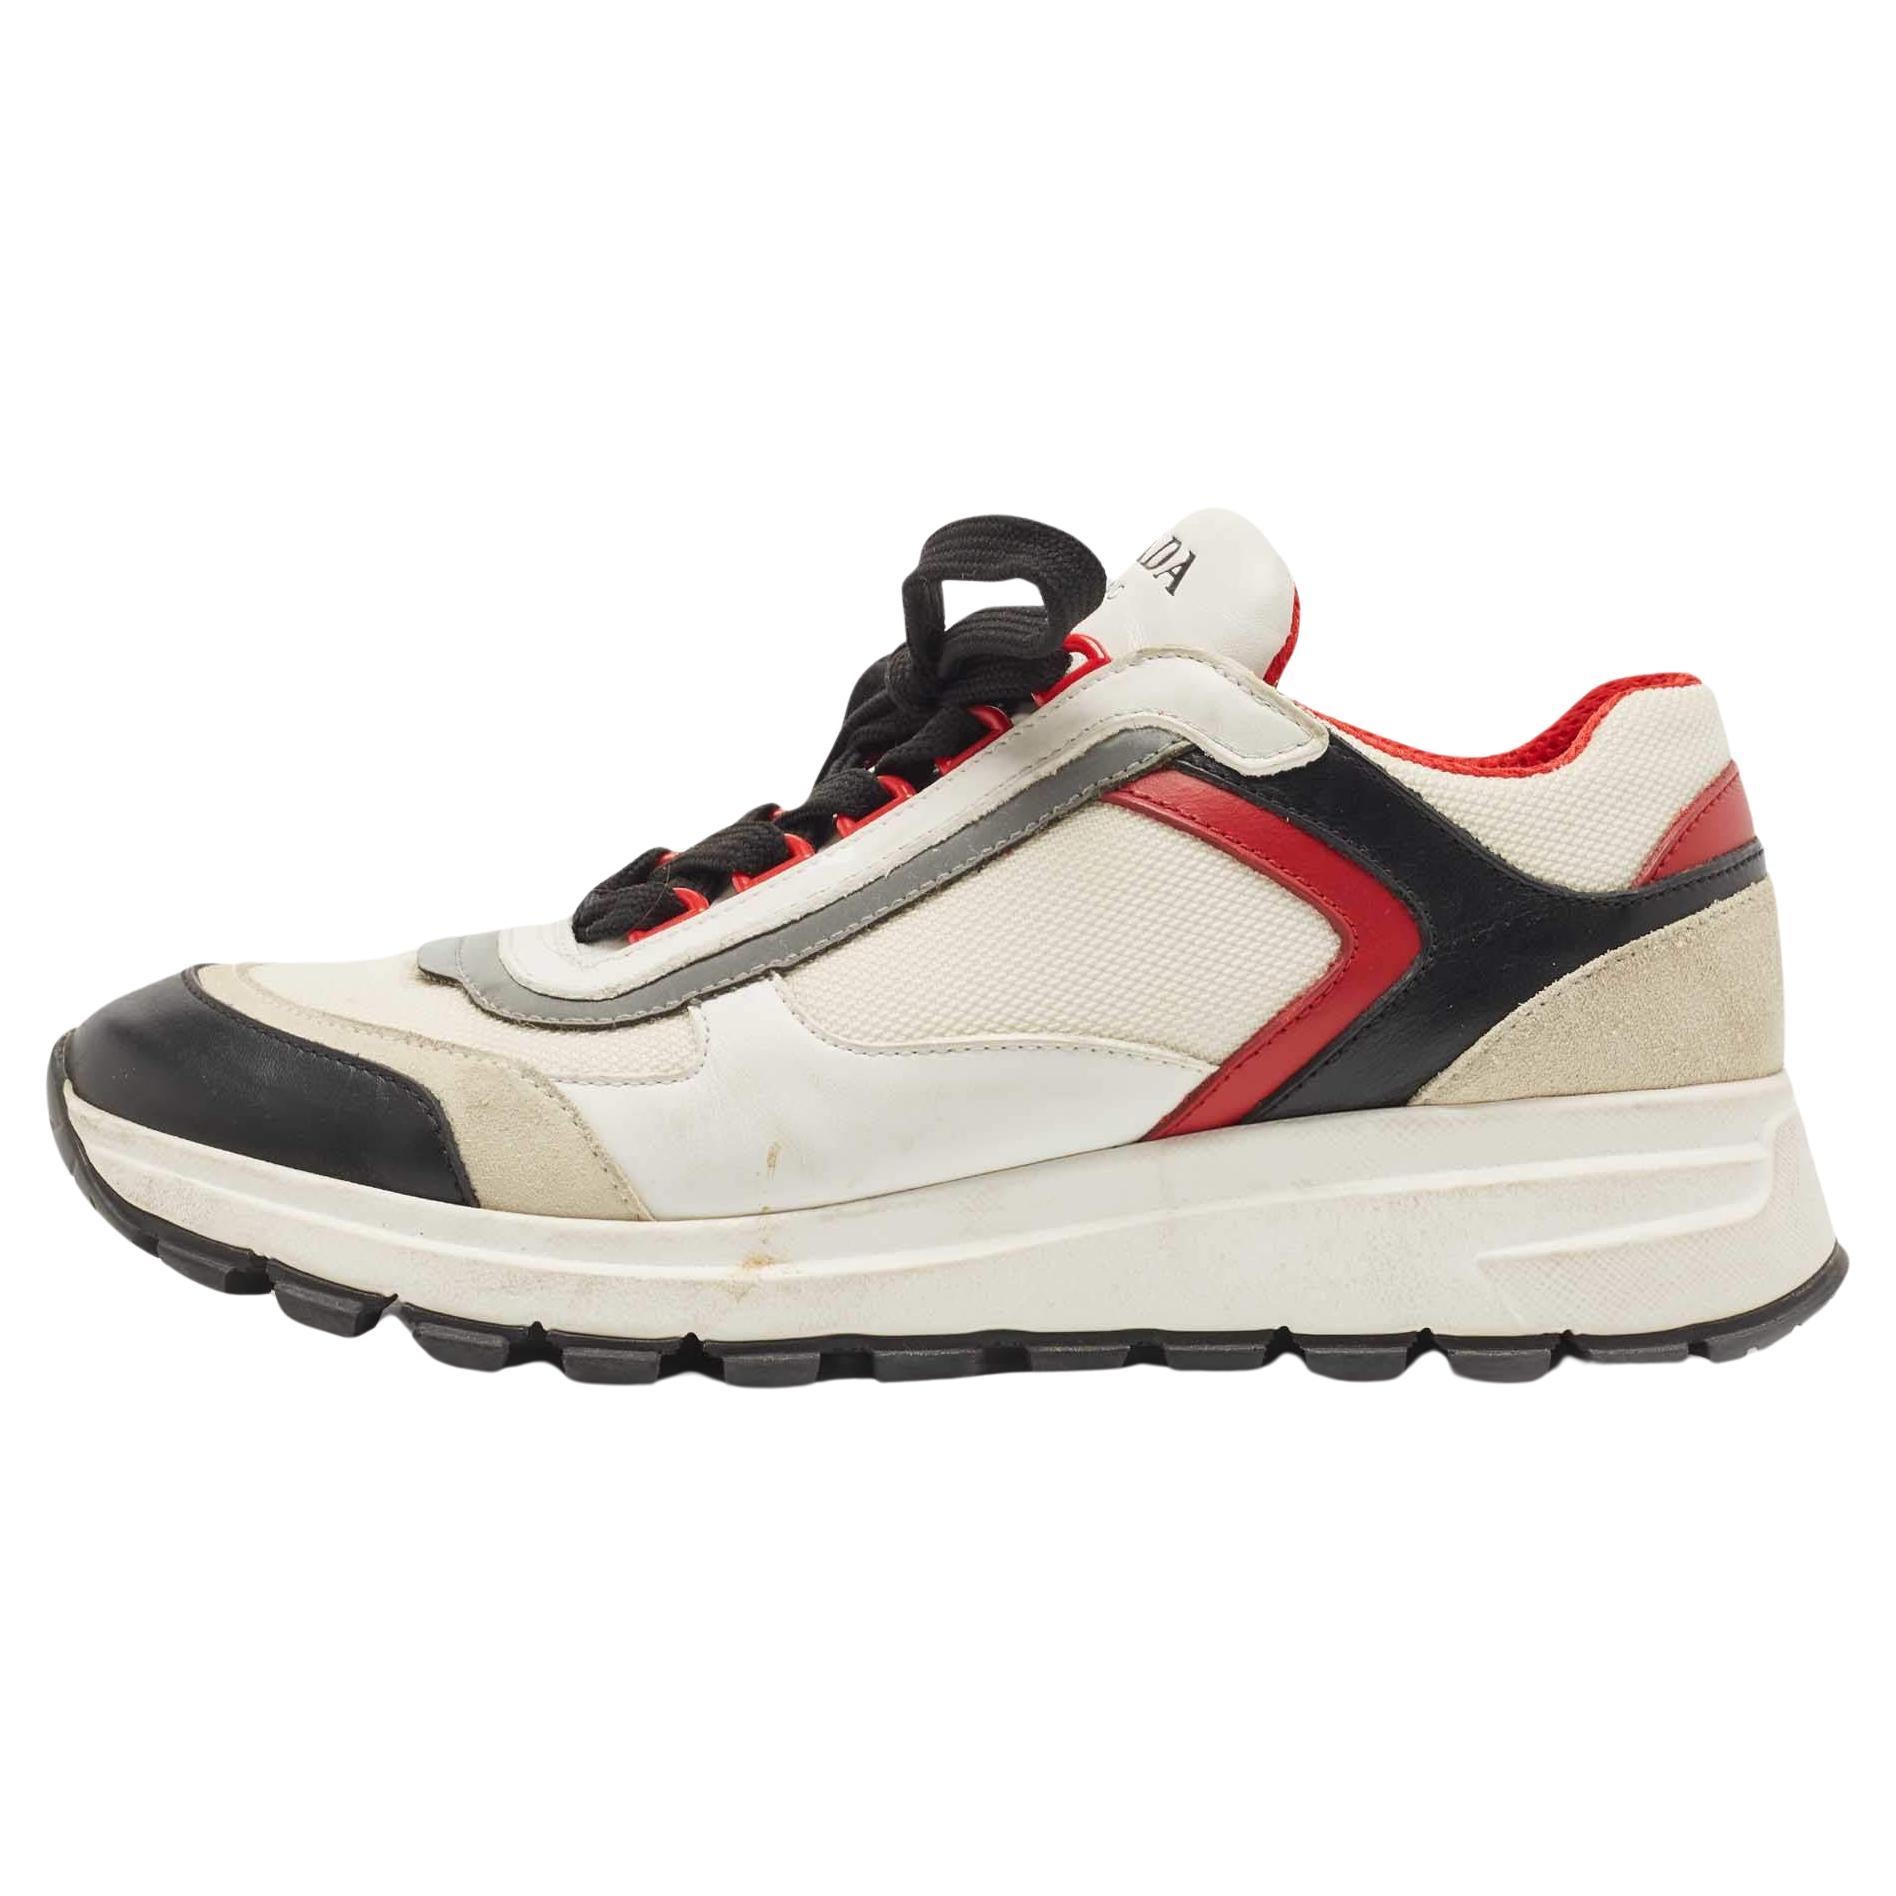 Prada Tricolor Mesh and Leather Low Top Sneakers Size 38 For Sale